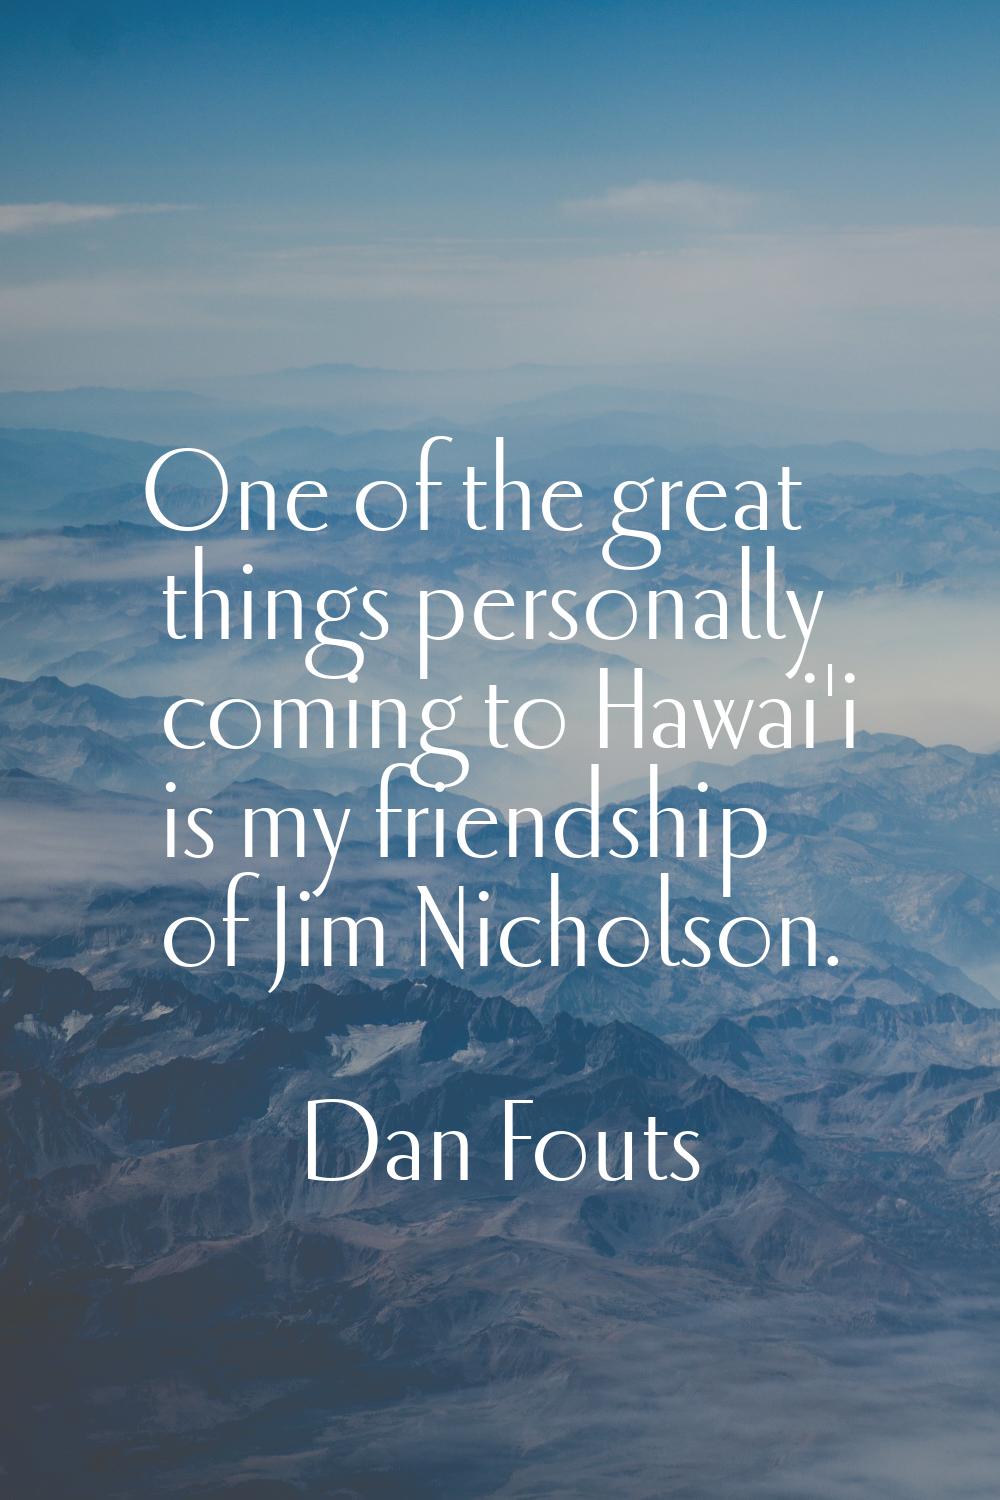 One of the great things personally coming to Hawai'i is my friendship of Jim Nicholson.